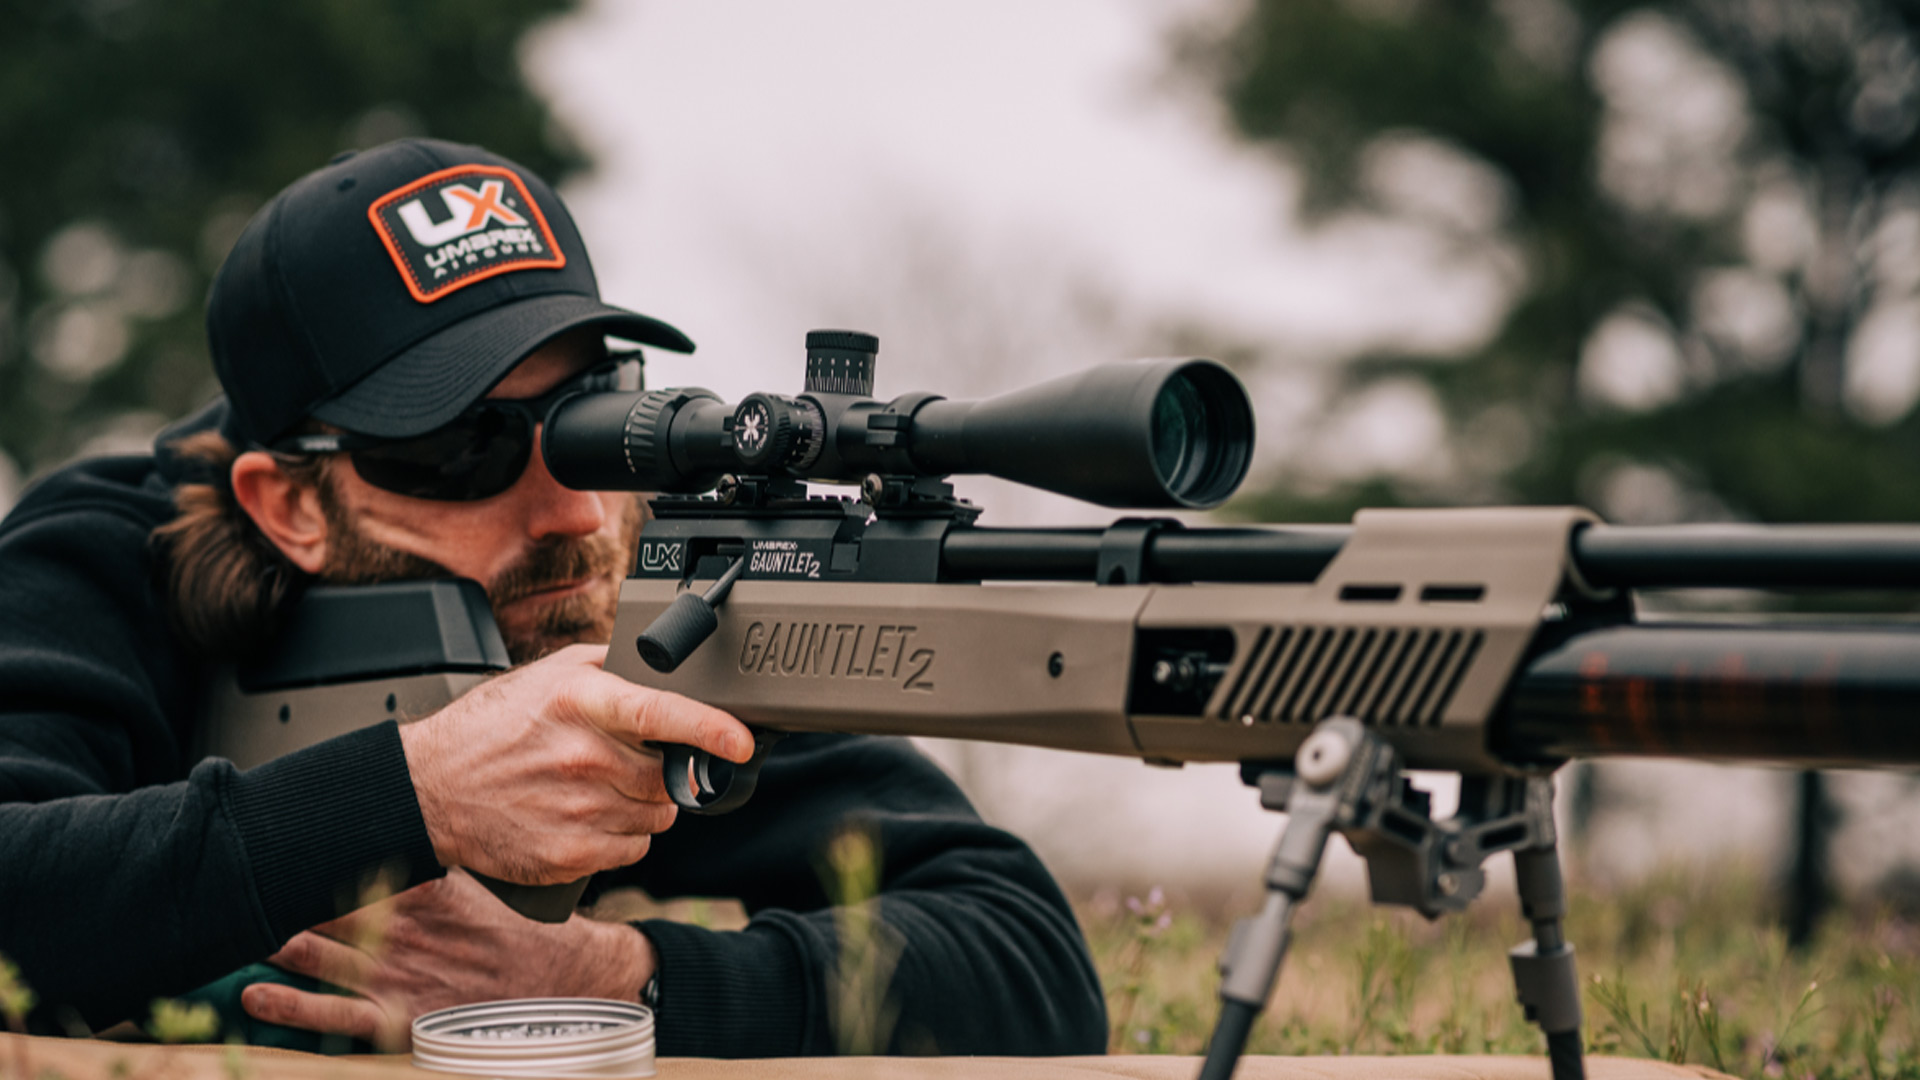 Umarex Uzi .22 Rifle | An Official Journal Of The NRA